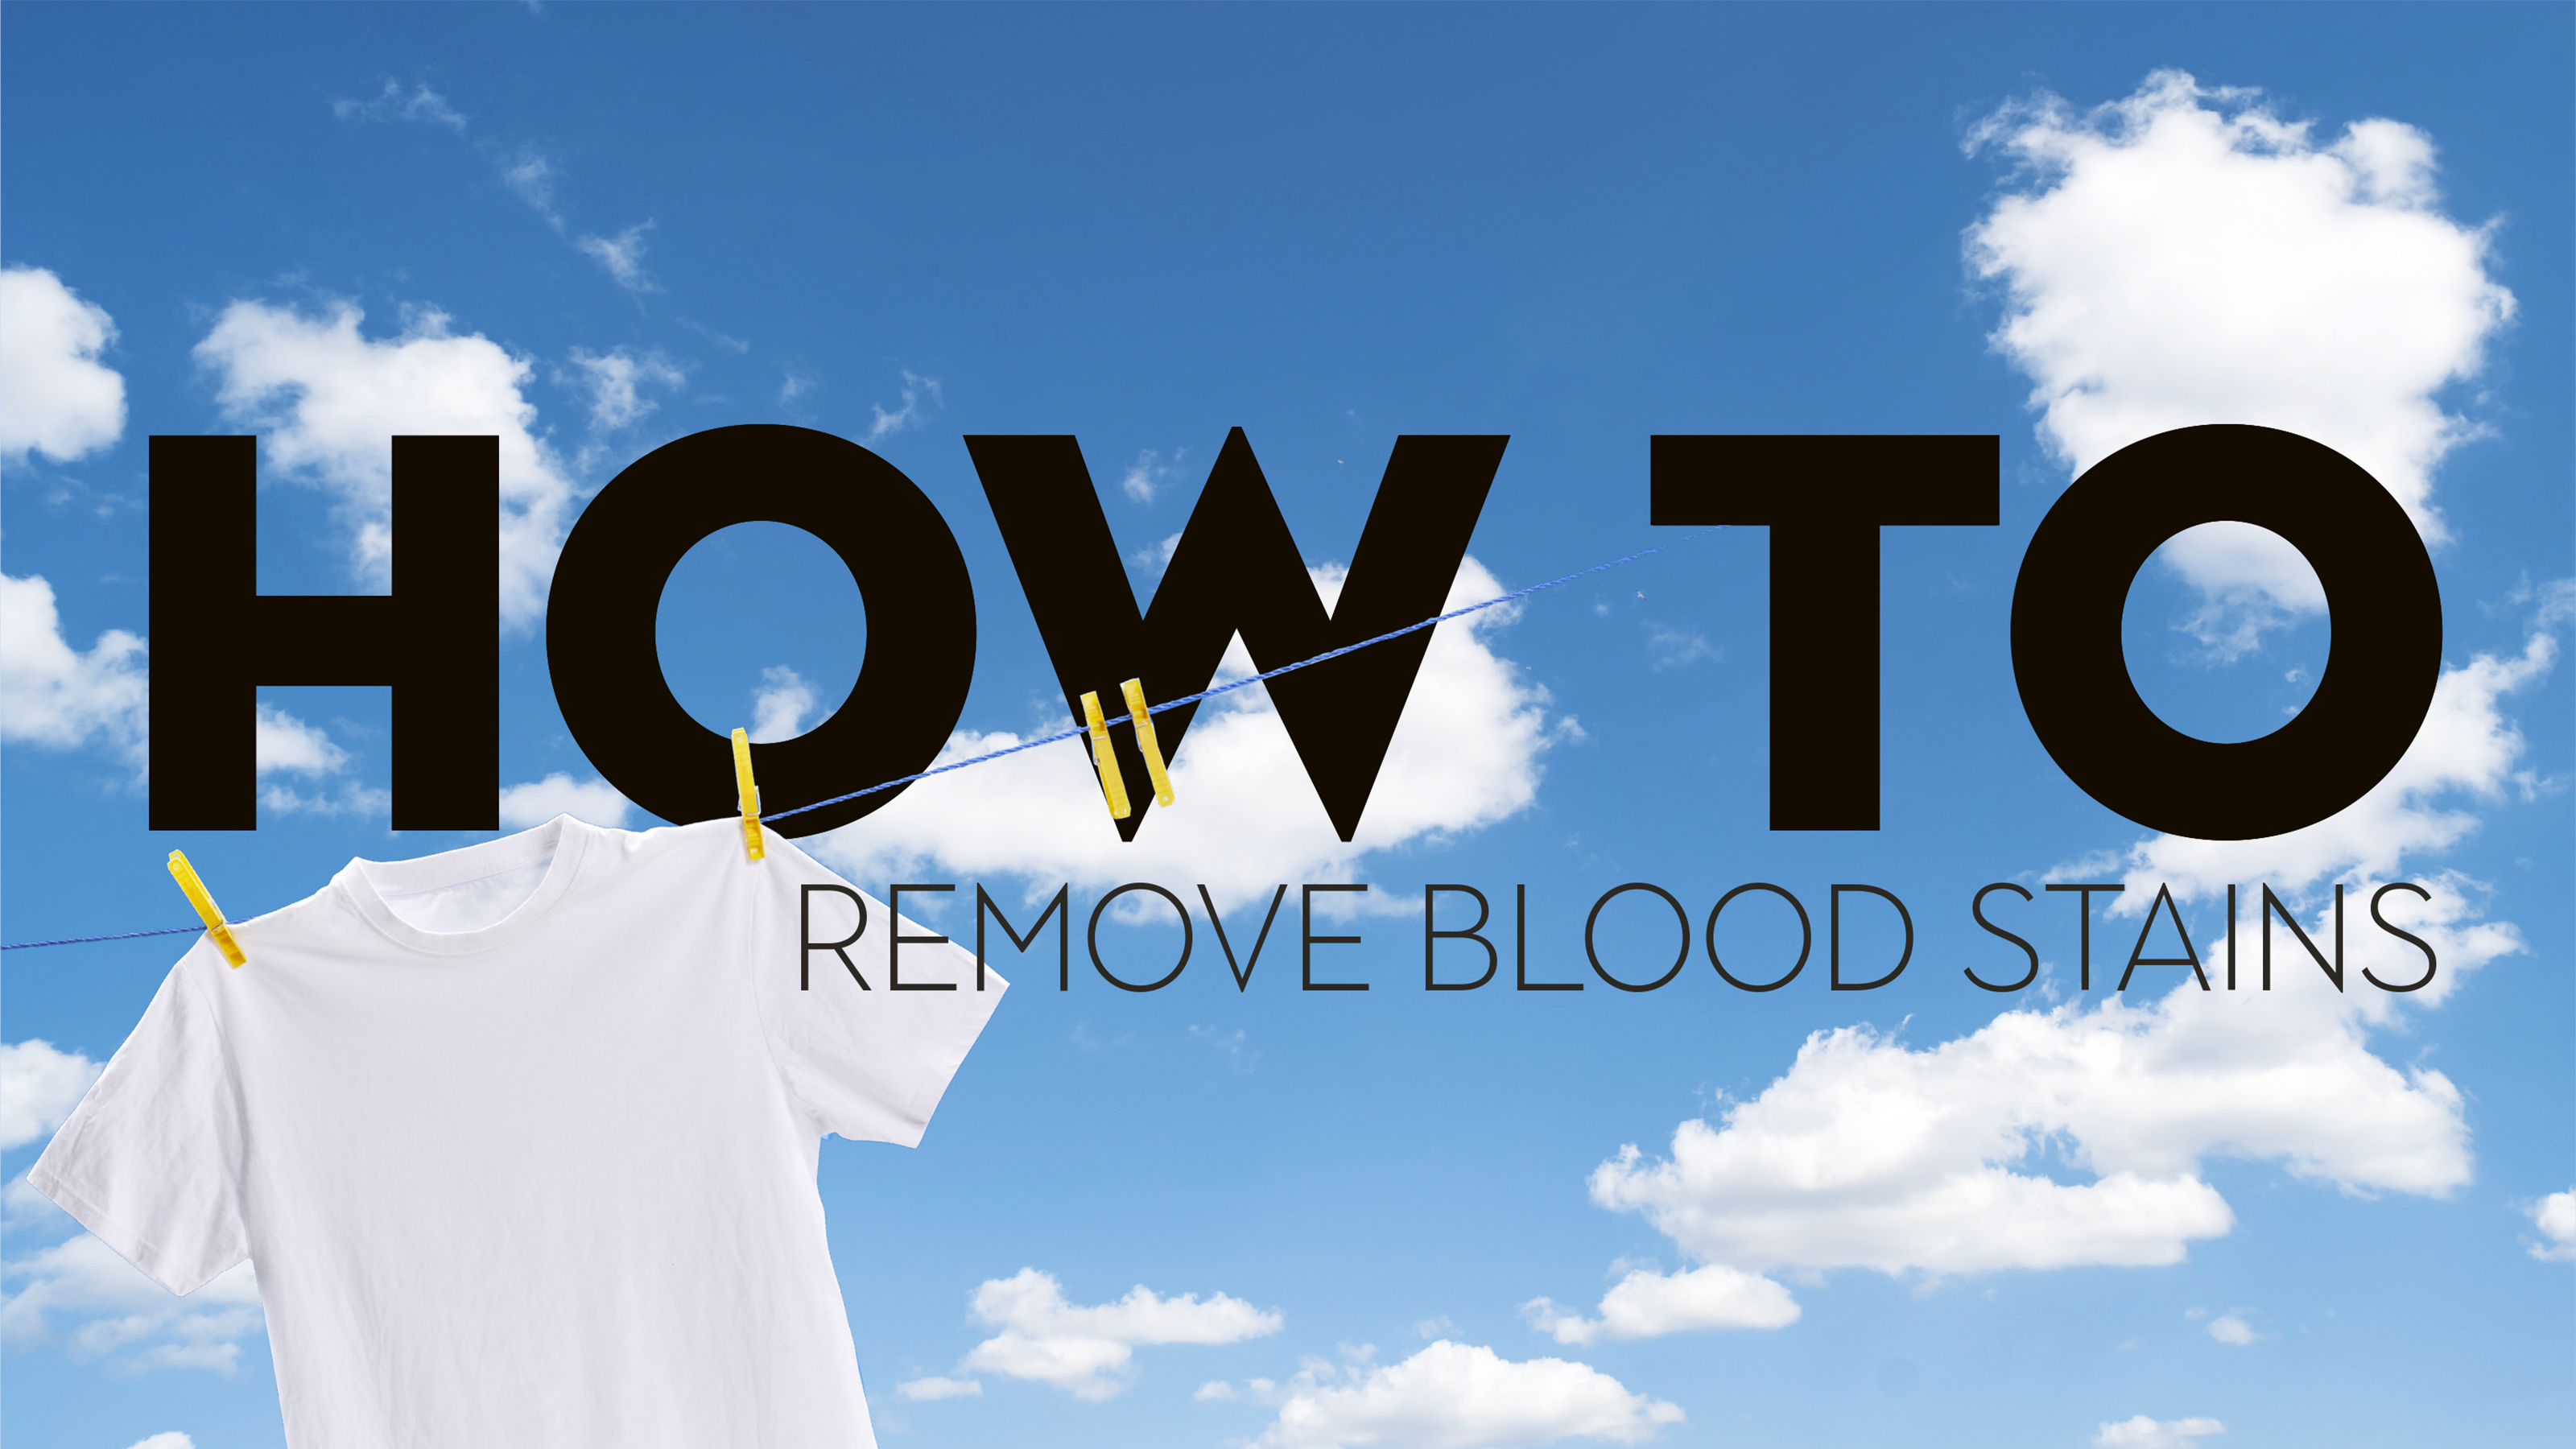 HOW TO GET RID/REMOVE BLOOD STAIN IN UNDERWEAR, SHORTS, BLANKET